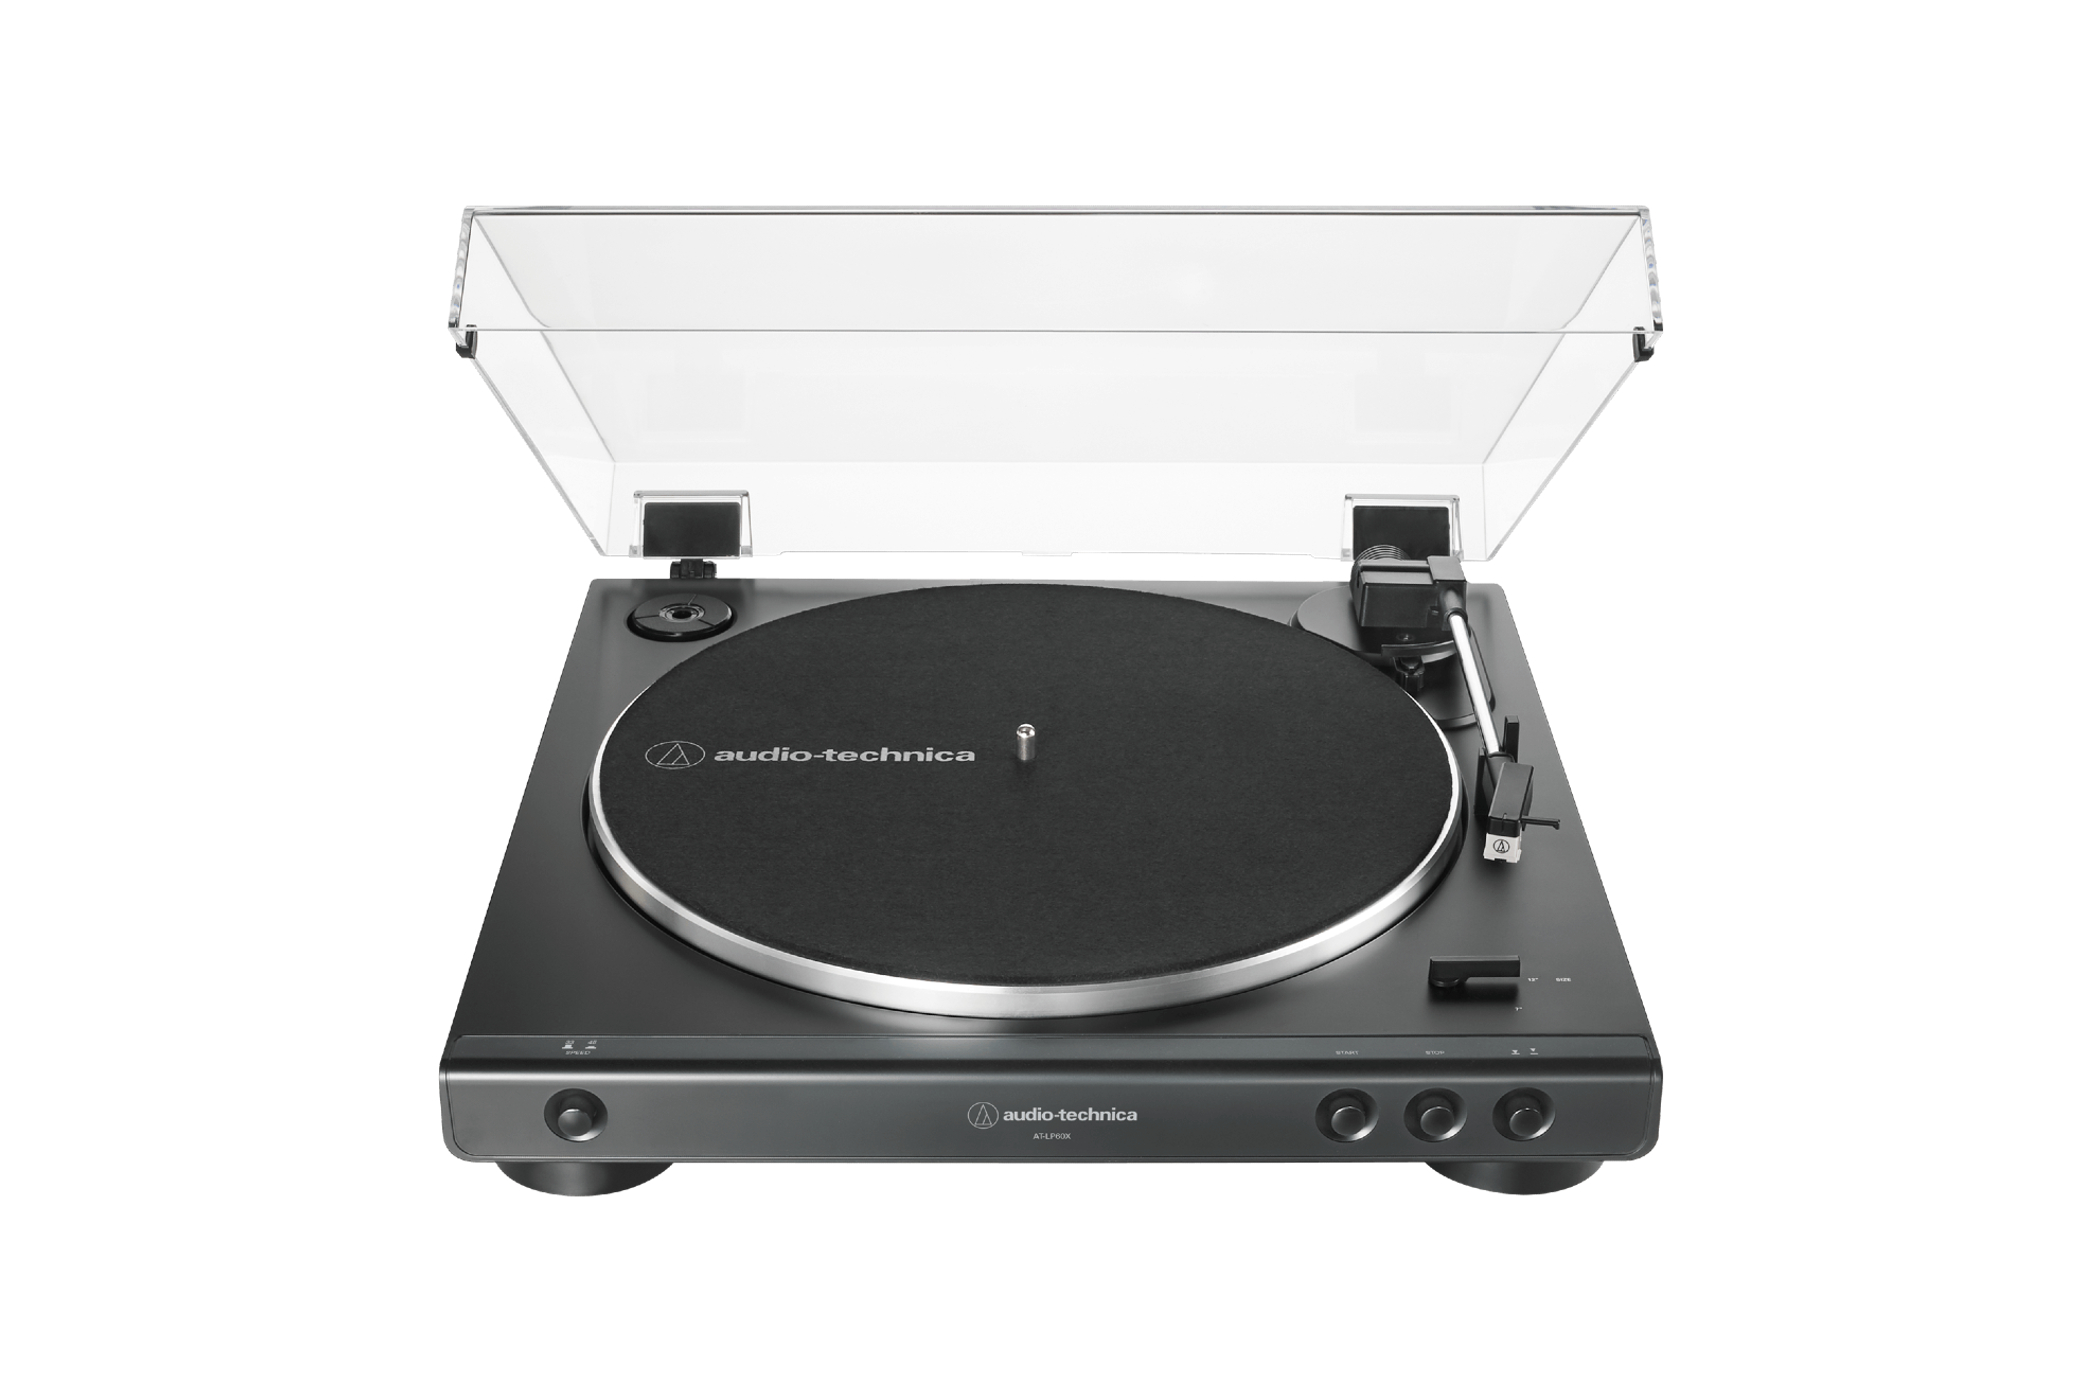 The Audio-Technica AT-LP60X turntable. 